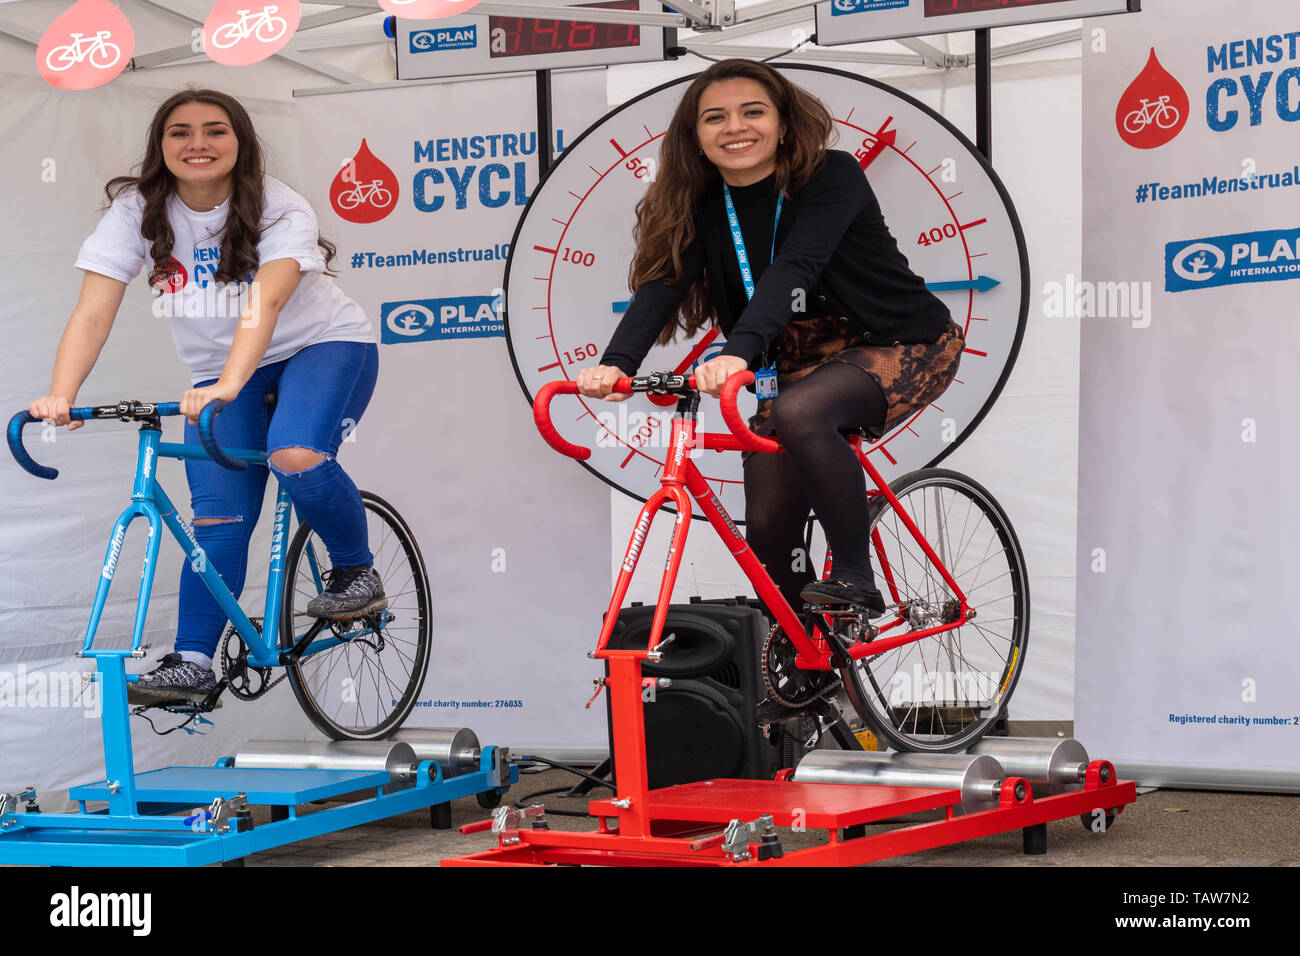 London 28th May 2019  Menstrual Hygiene Day is marked by Plan International with an event 'the menstrual cycle' on London's South Bank with the public riding stationary bikes to finish the menstrual cycle course Credit Ian Davidson/Alamy Live News Stock Photo